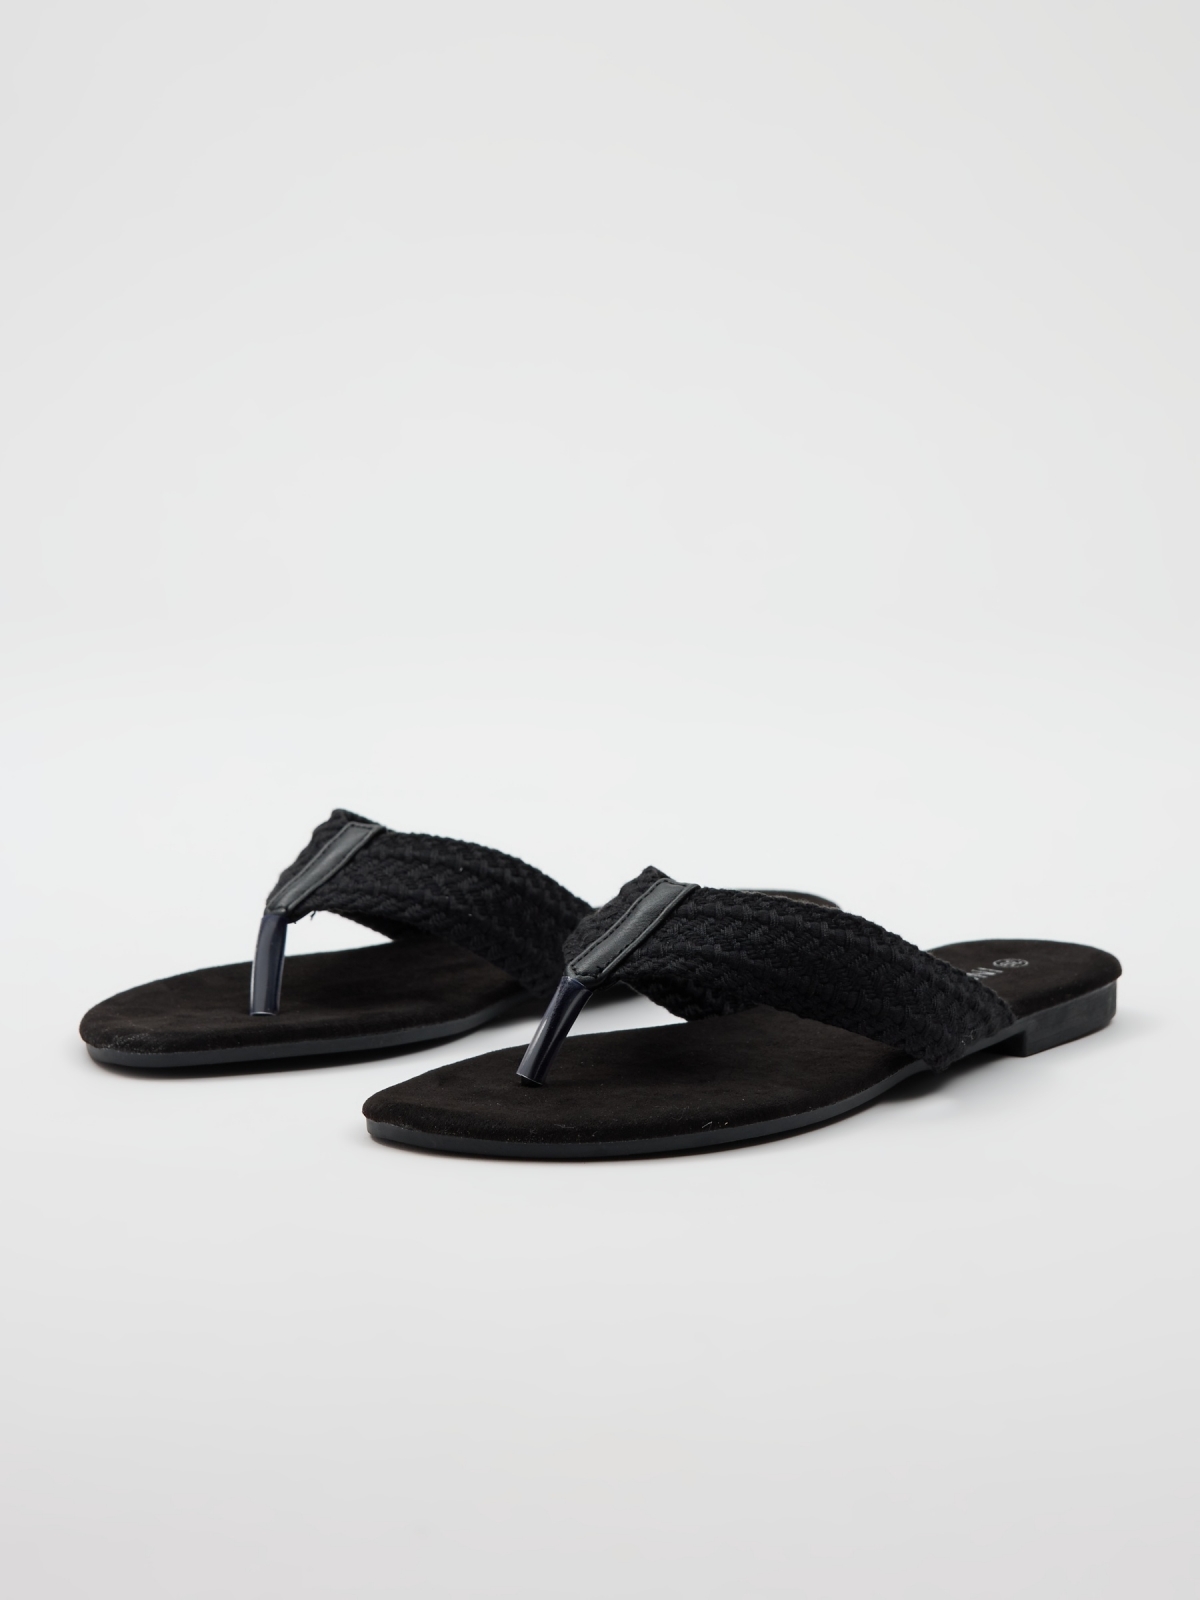 Embroidered toe sandal black 45º front view